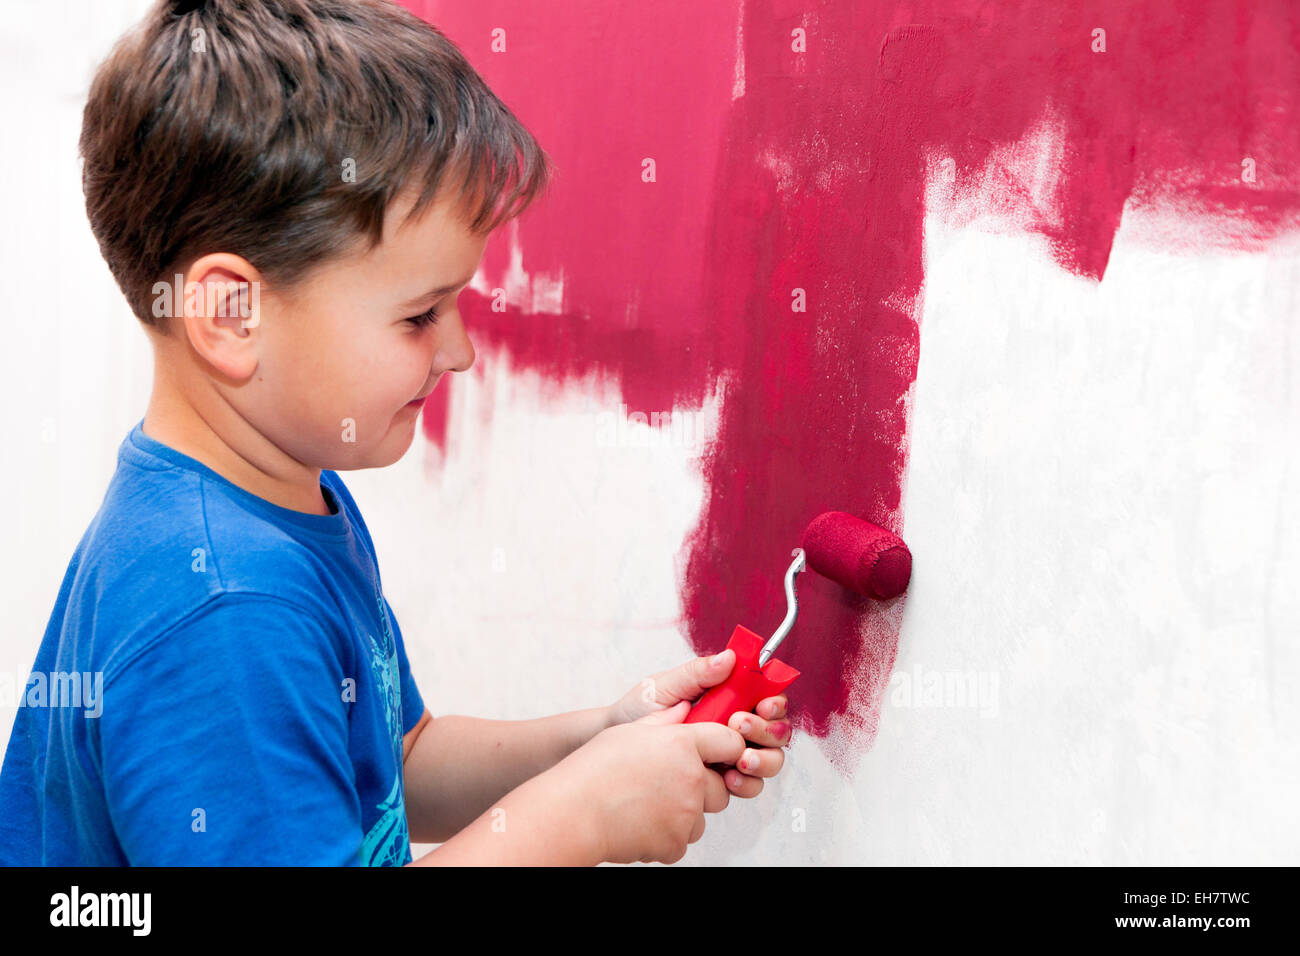 boy painting the wall red in the apartment Stock Photo